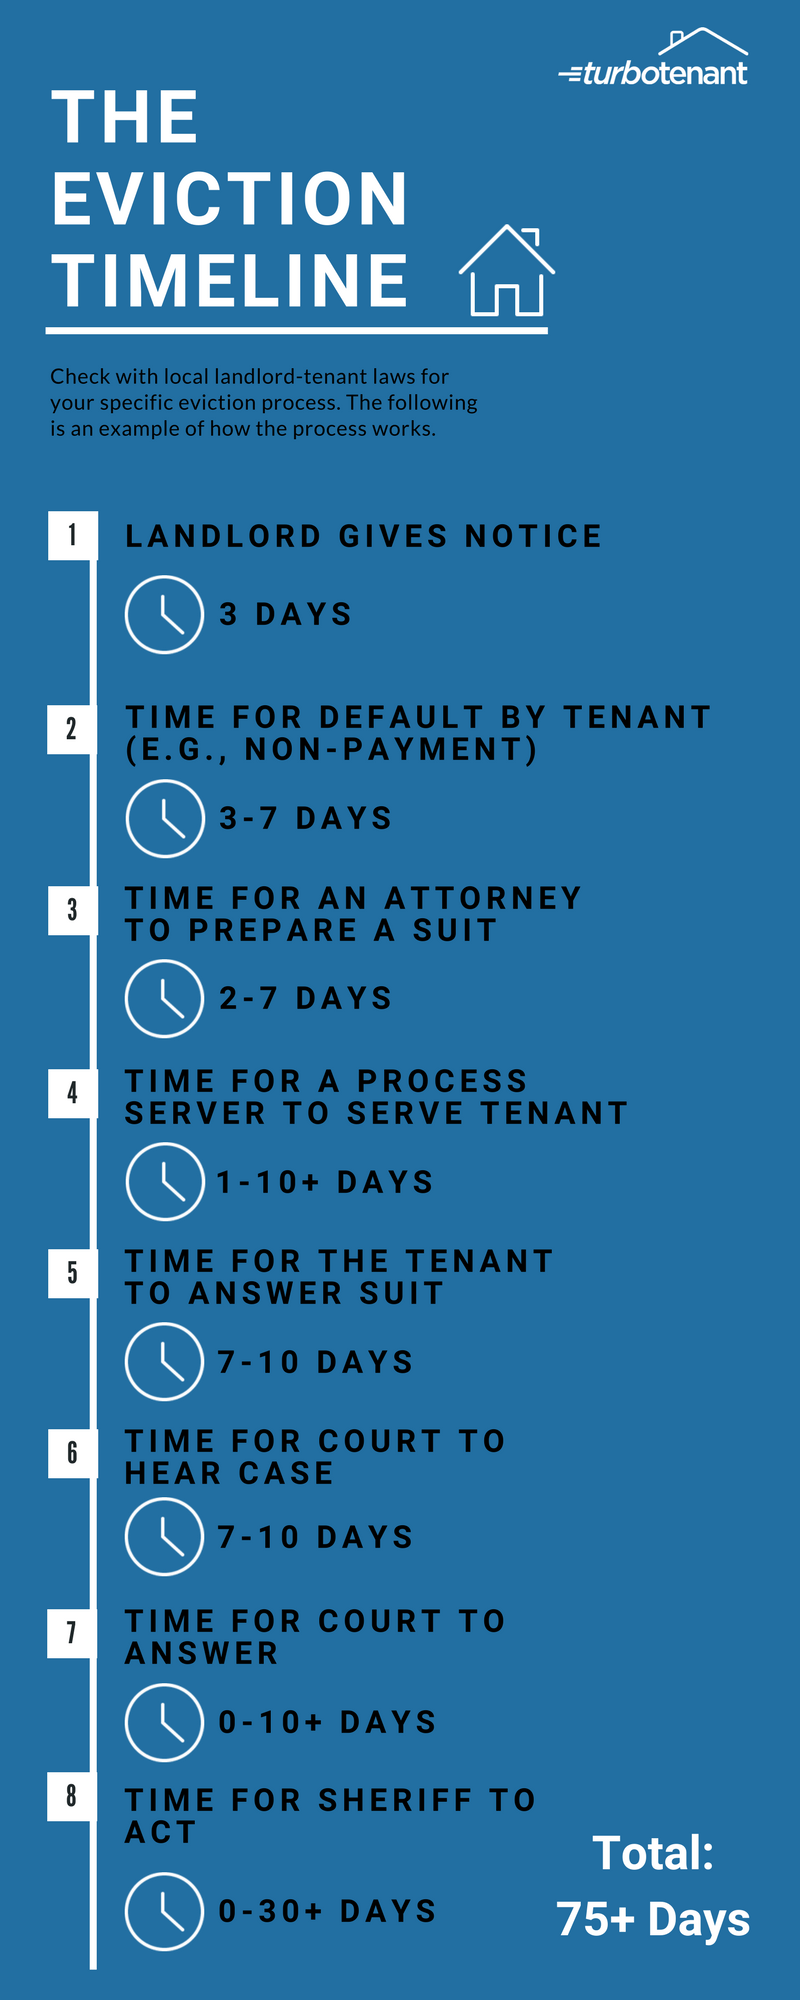 Infographic of an eviction timeline